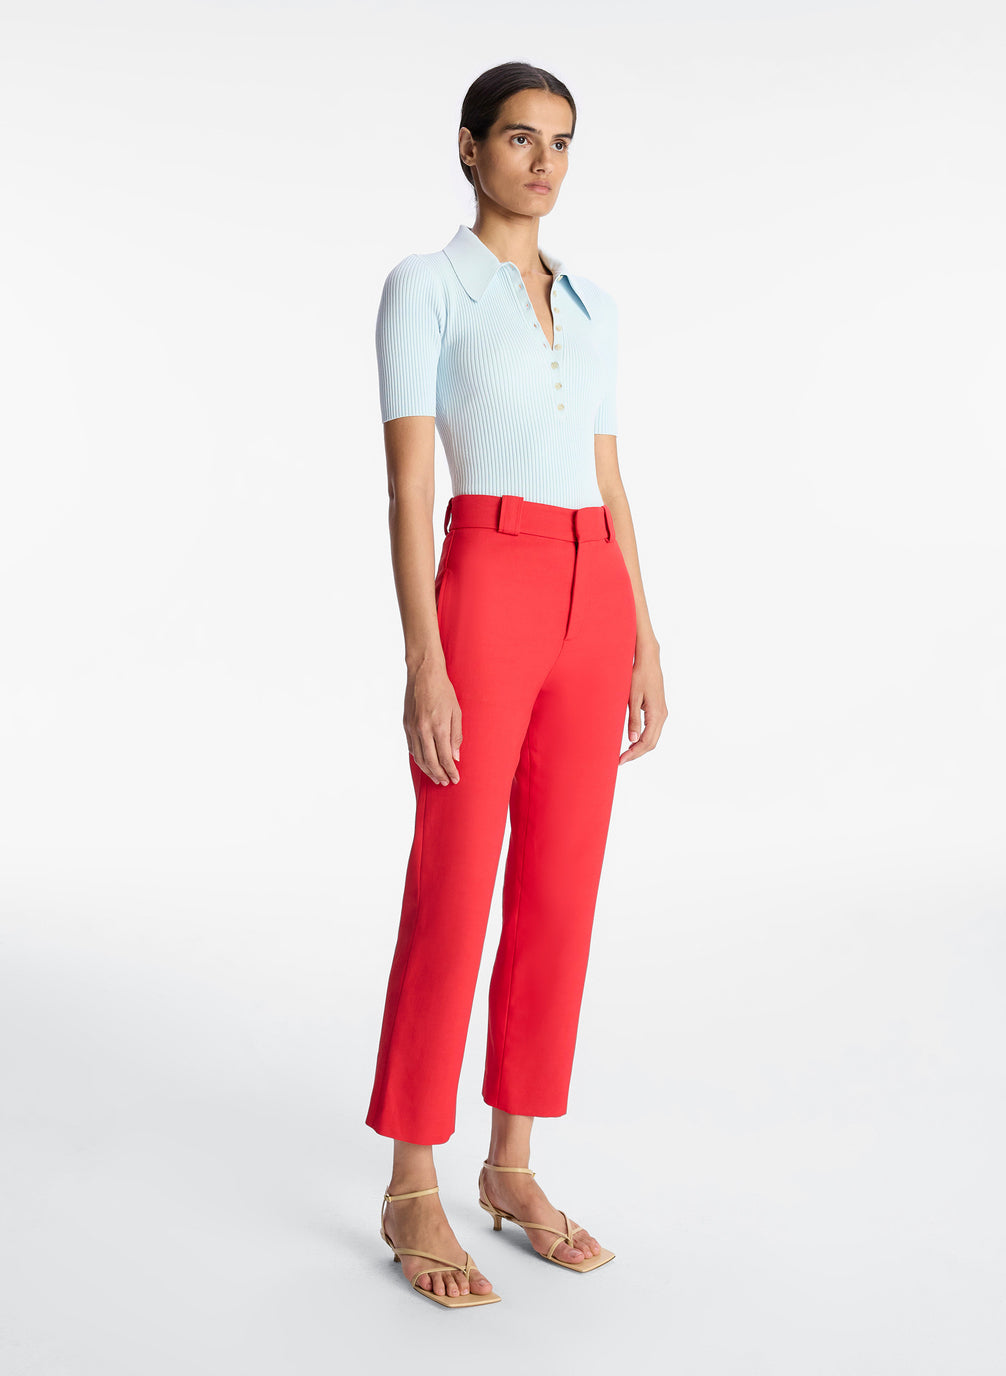 side view of woman wearing light blue collared shirt and red ankle pant